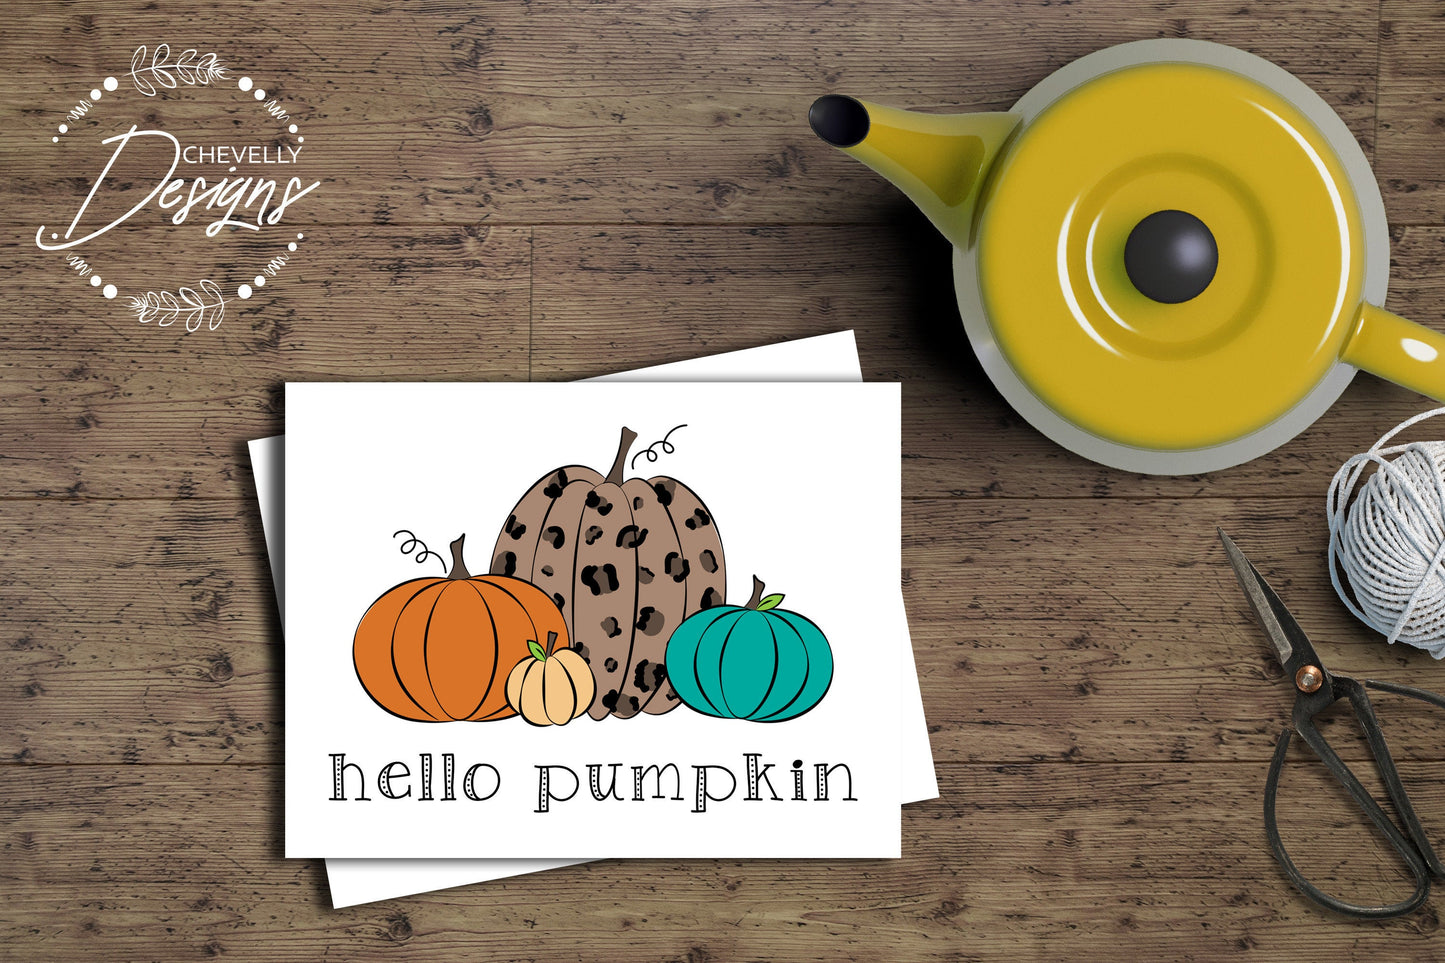 Hello Pumpkin Stationary - Fall Notecards - A2 Size 4.25"x5.5" >>>Instant Digital Download<<<